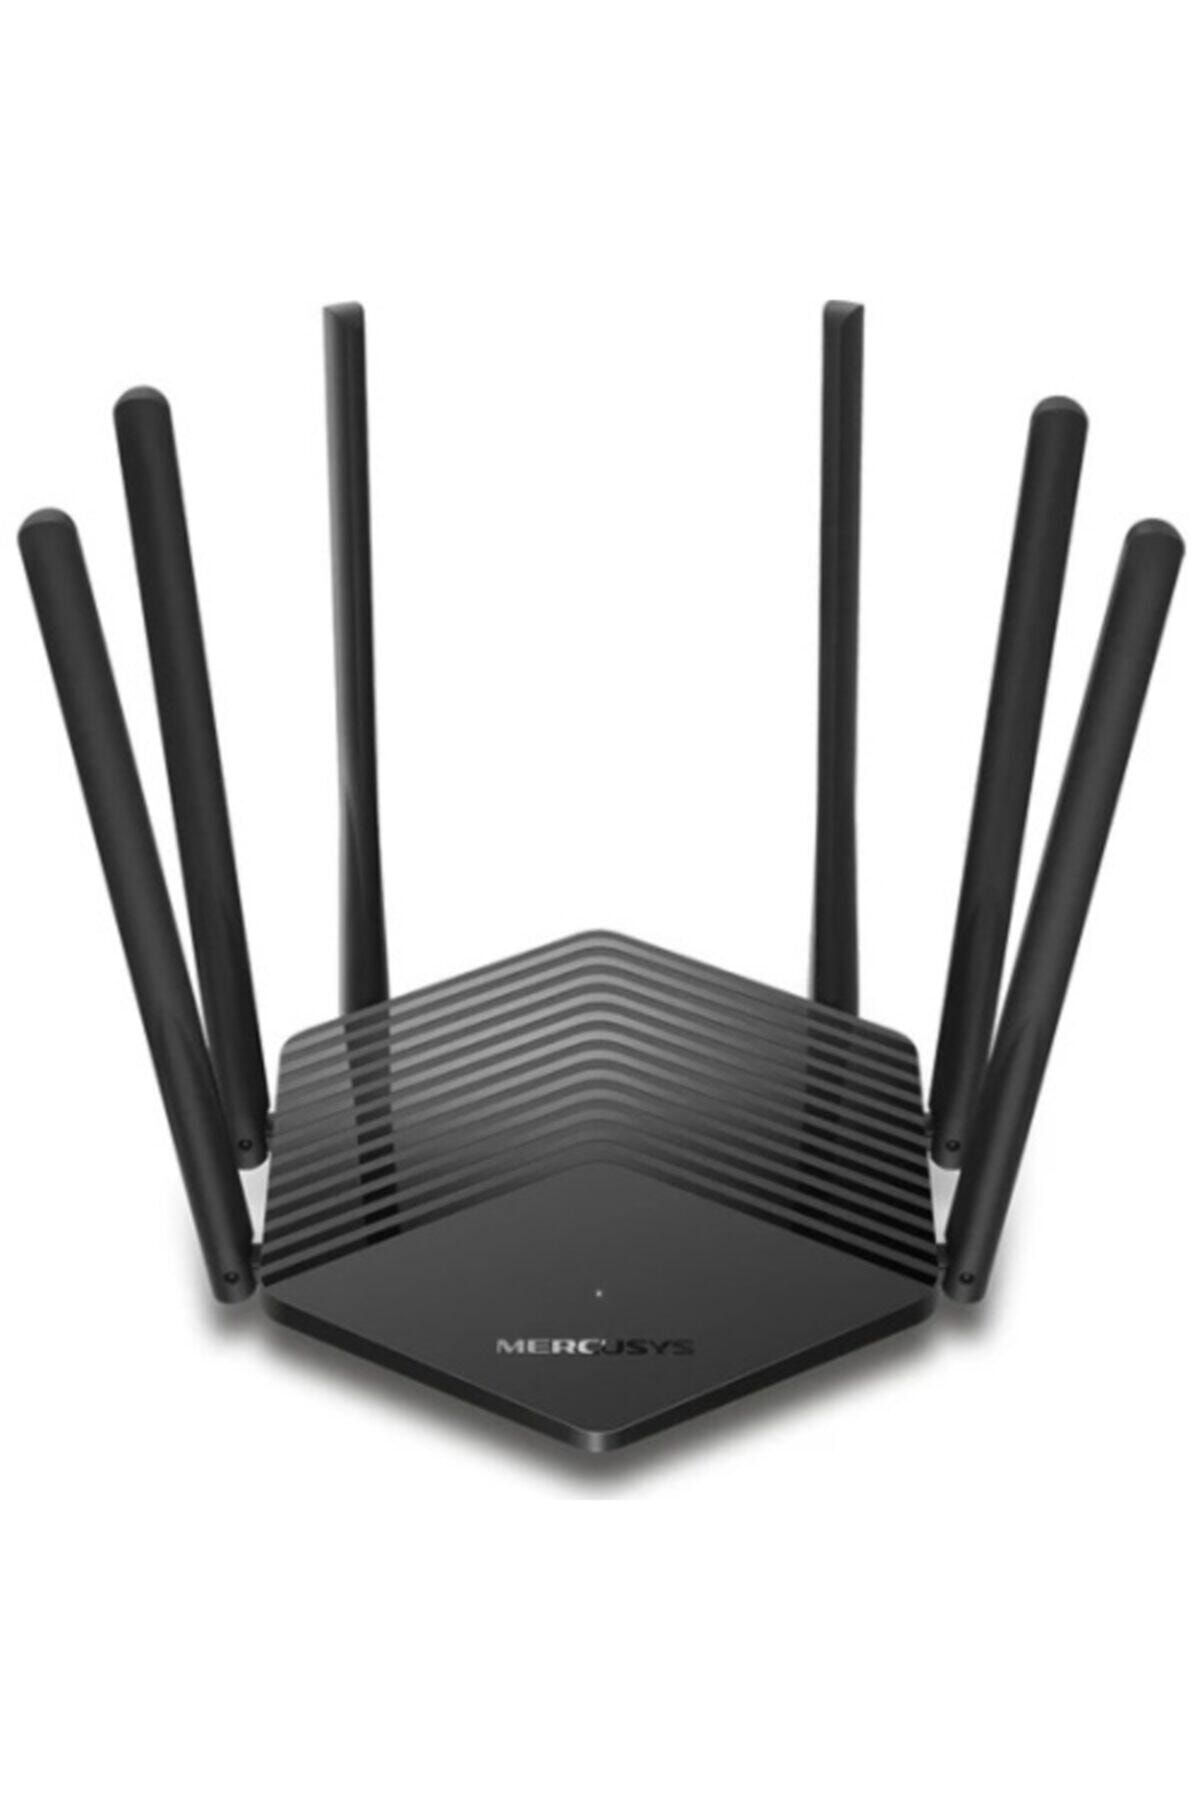 Mercusys MR50G Ac 1900 Mbps Wireless Dual Band Gigabit Router